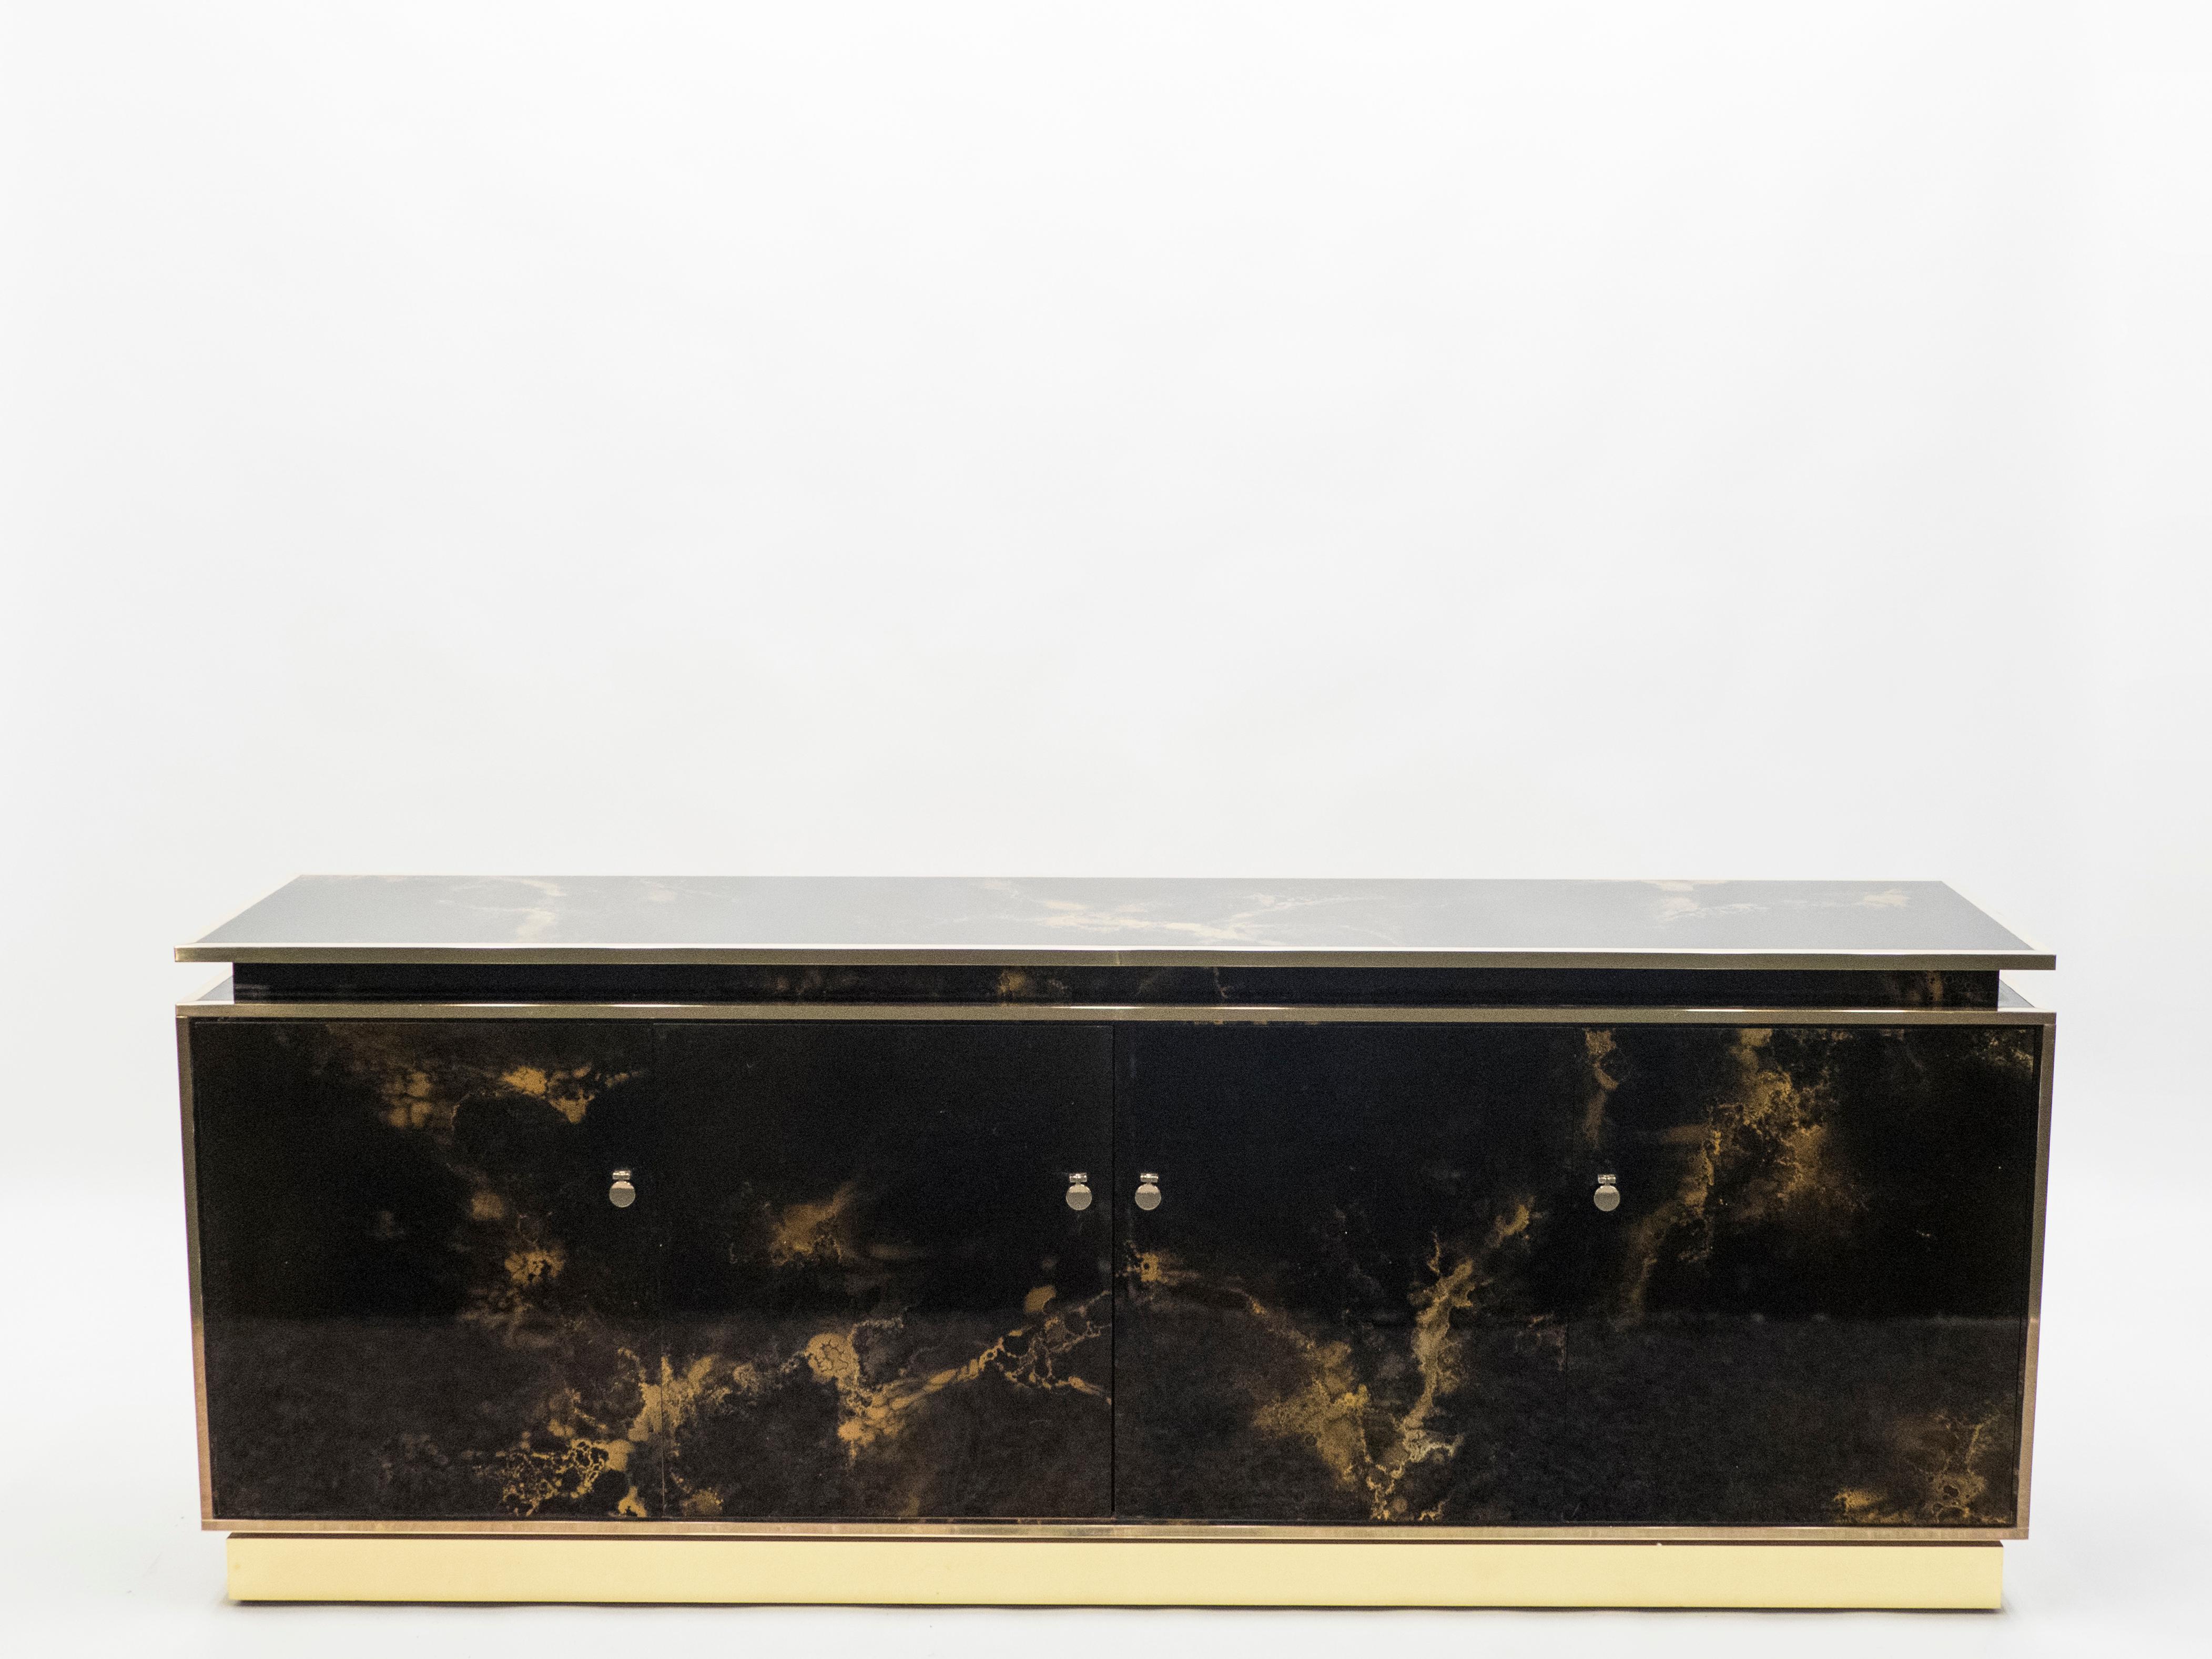 An exciting example of French design firm Maison Jansen’s commissioned pieces. This large sideboard is made from solid mahogany, lacquered in a rich dark brown and bronze–golden finish. The resulting effect is a beautiful mottling of color around